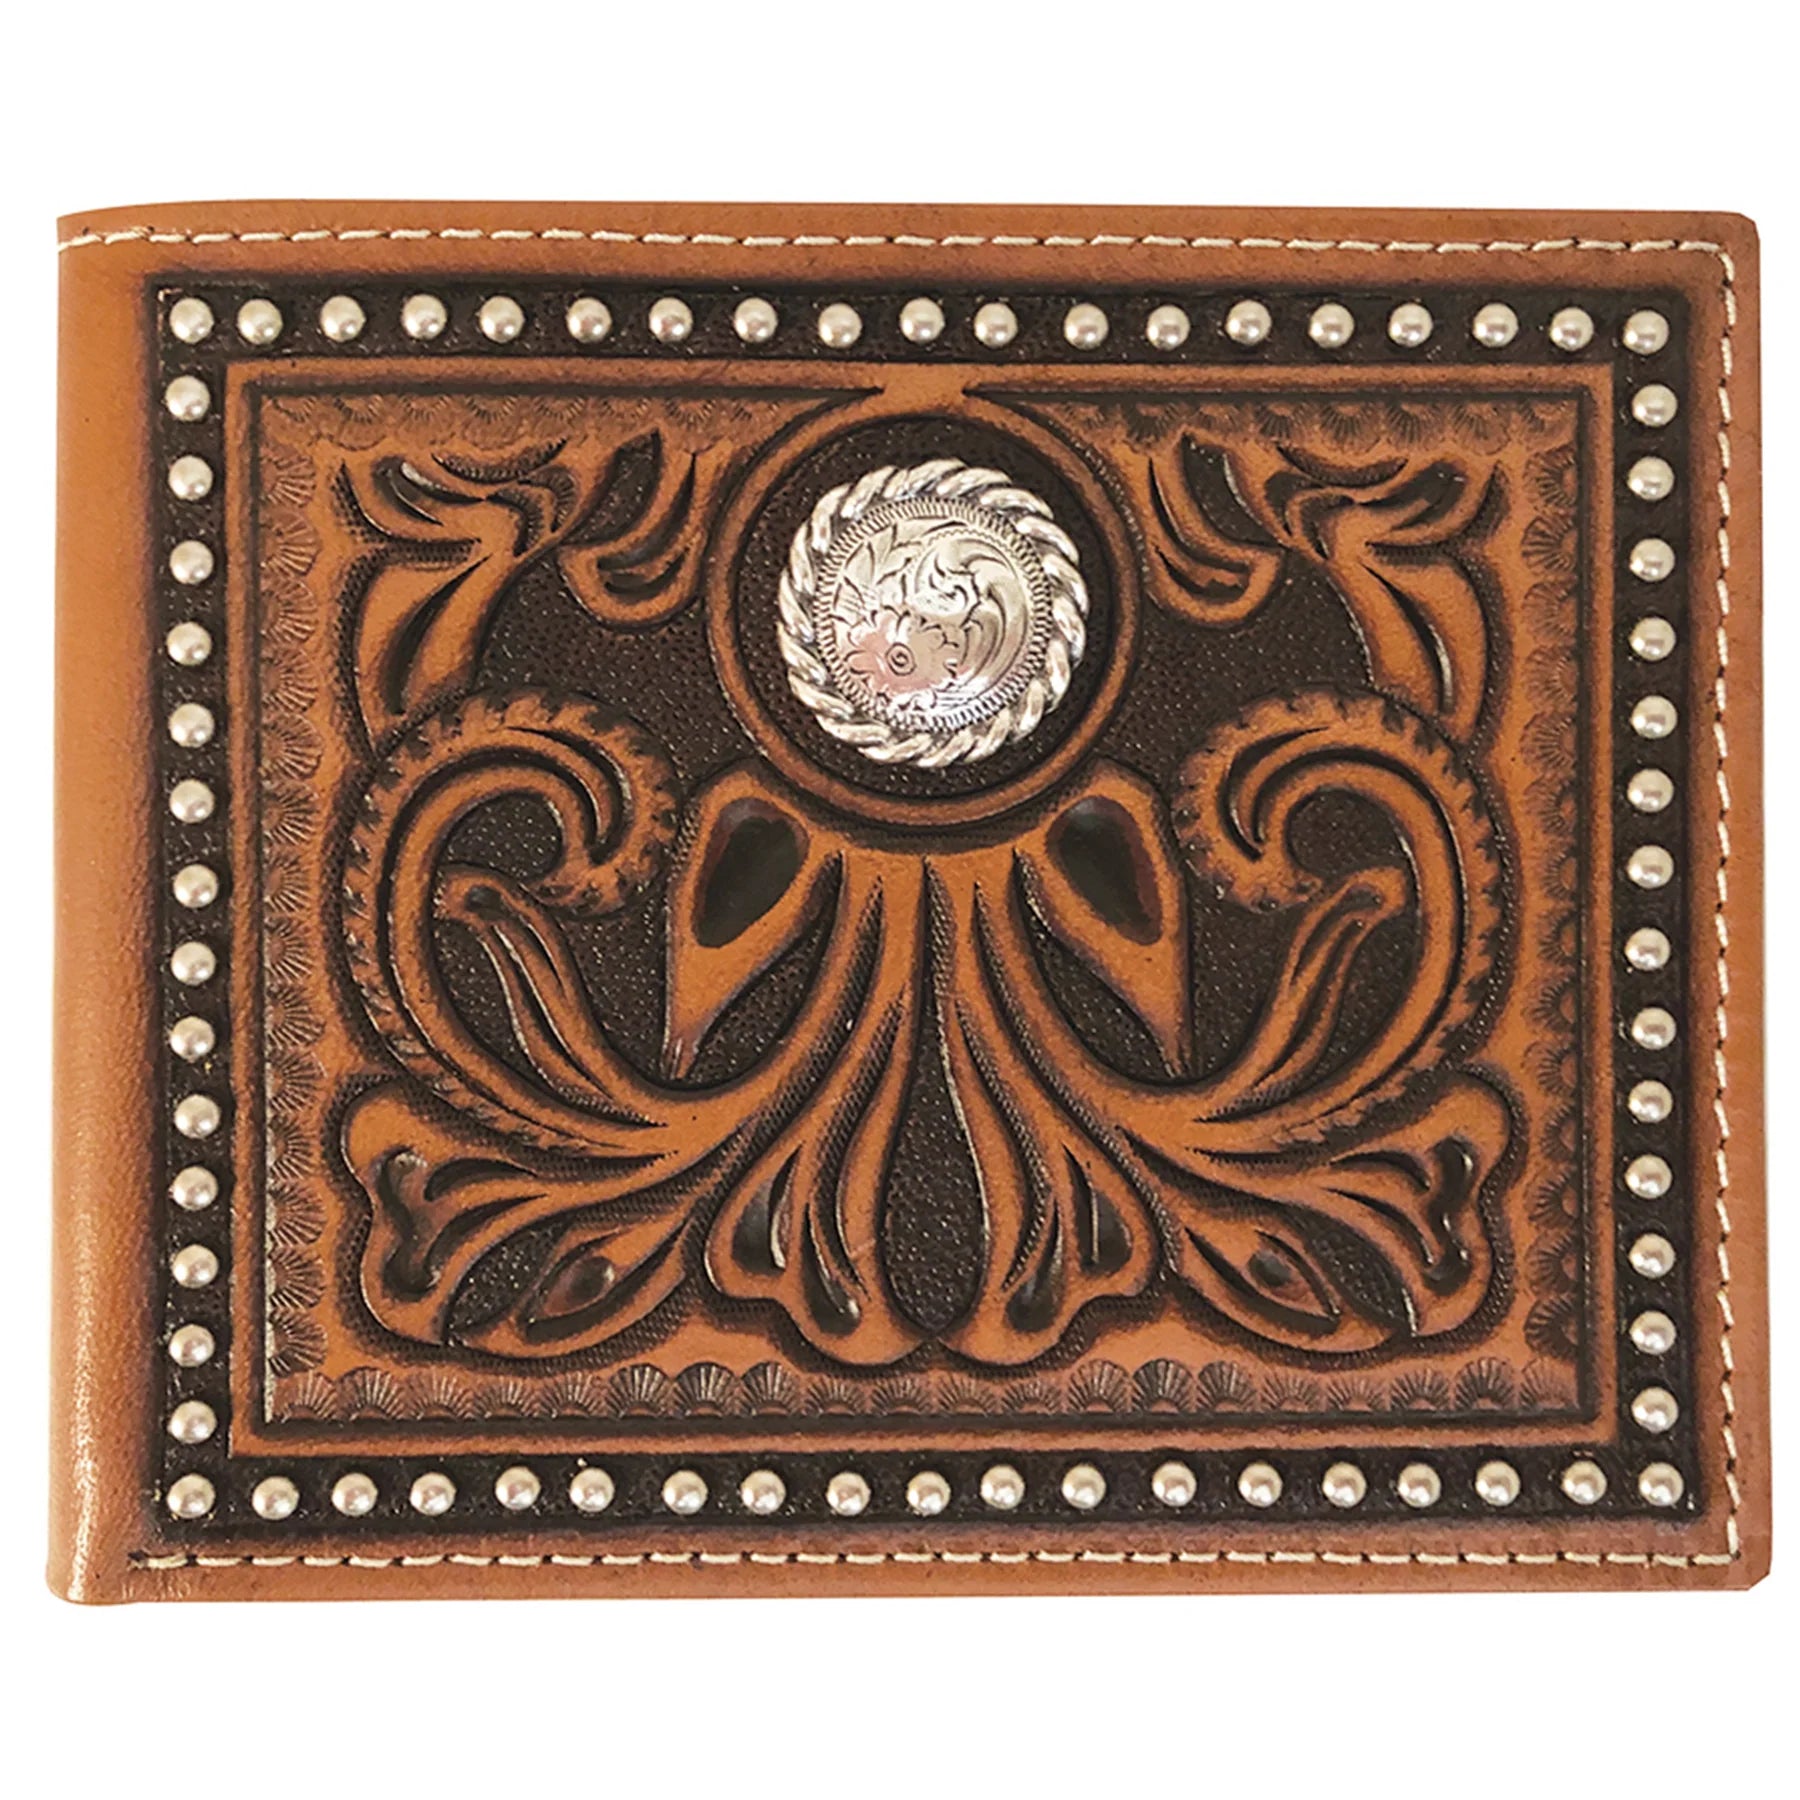 Roper Wallet - Bi-fold Tooled Leather - The Trading Stables